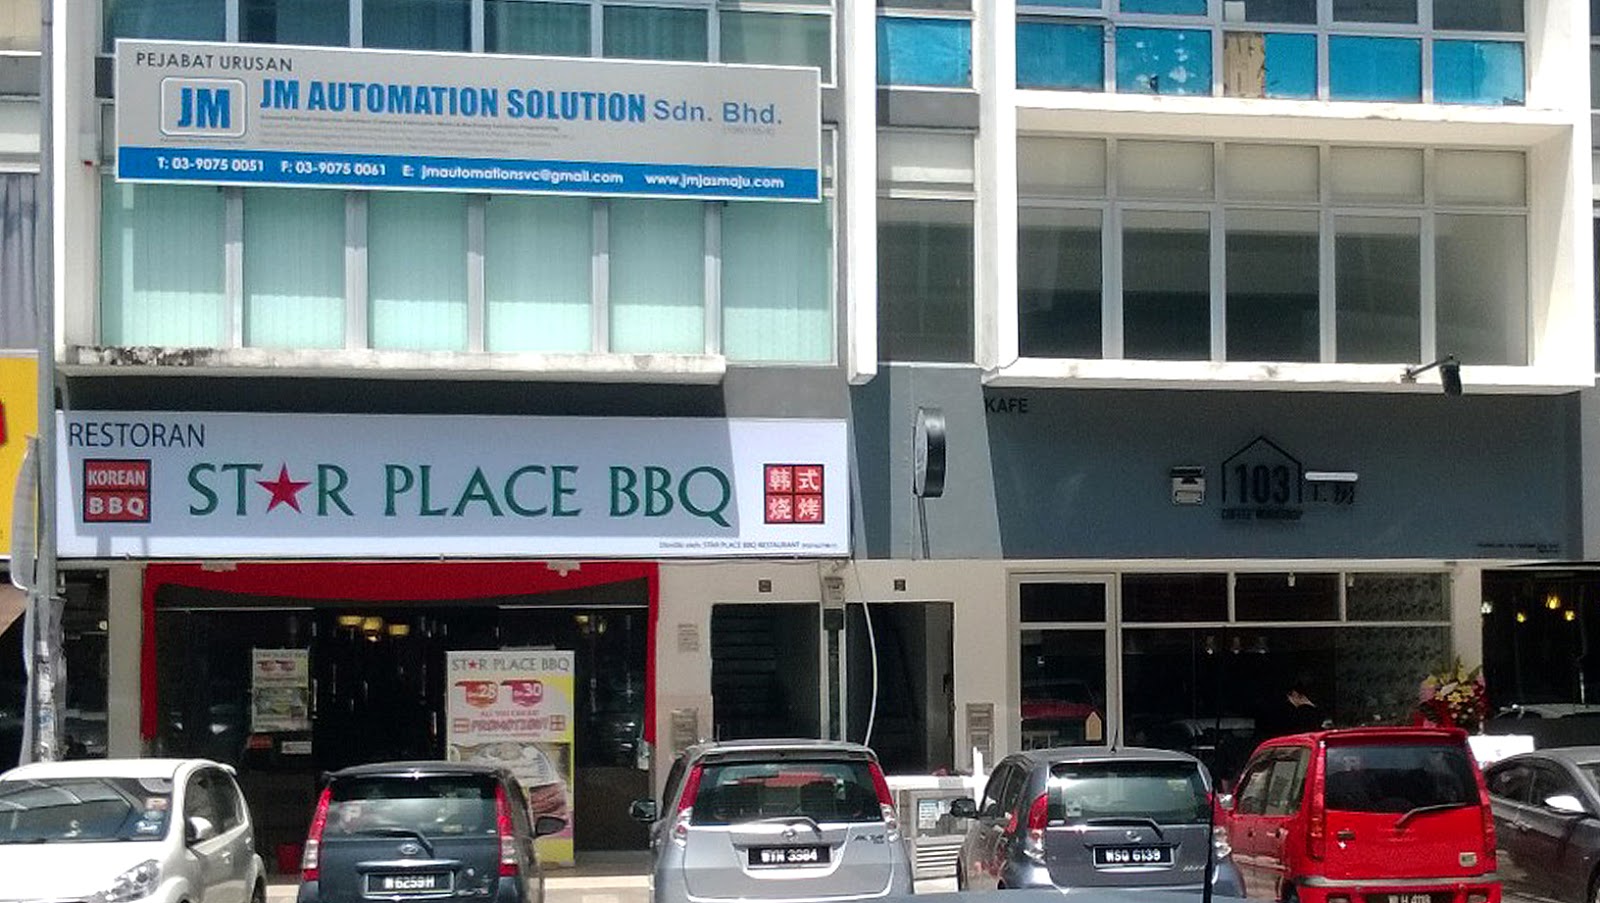 New Restaurants In Town at Dataran C180 - Star Place BBQ and 103 Coffee